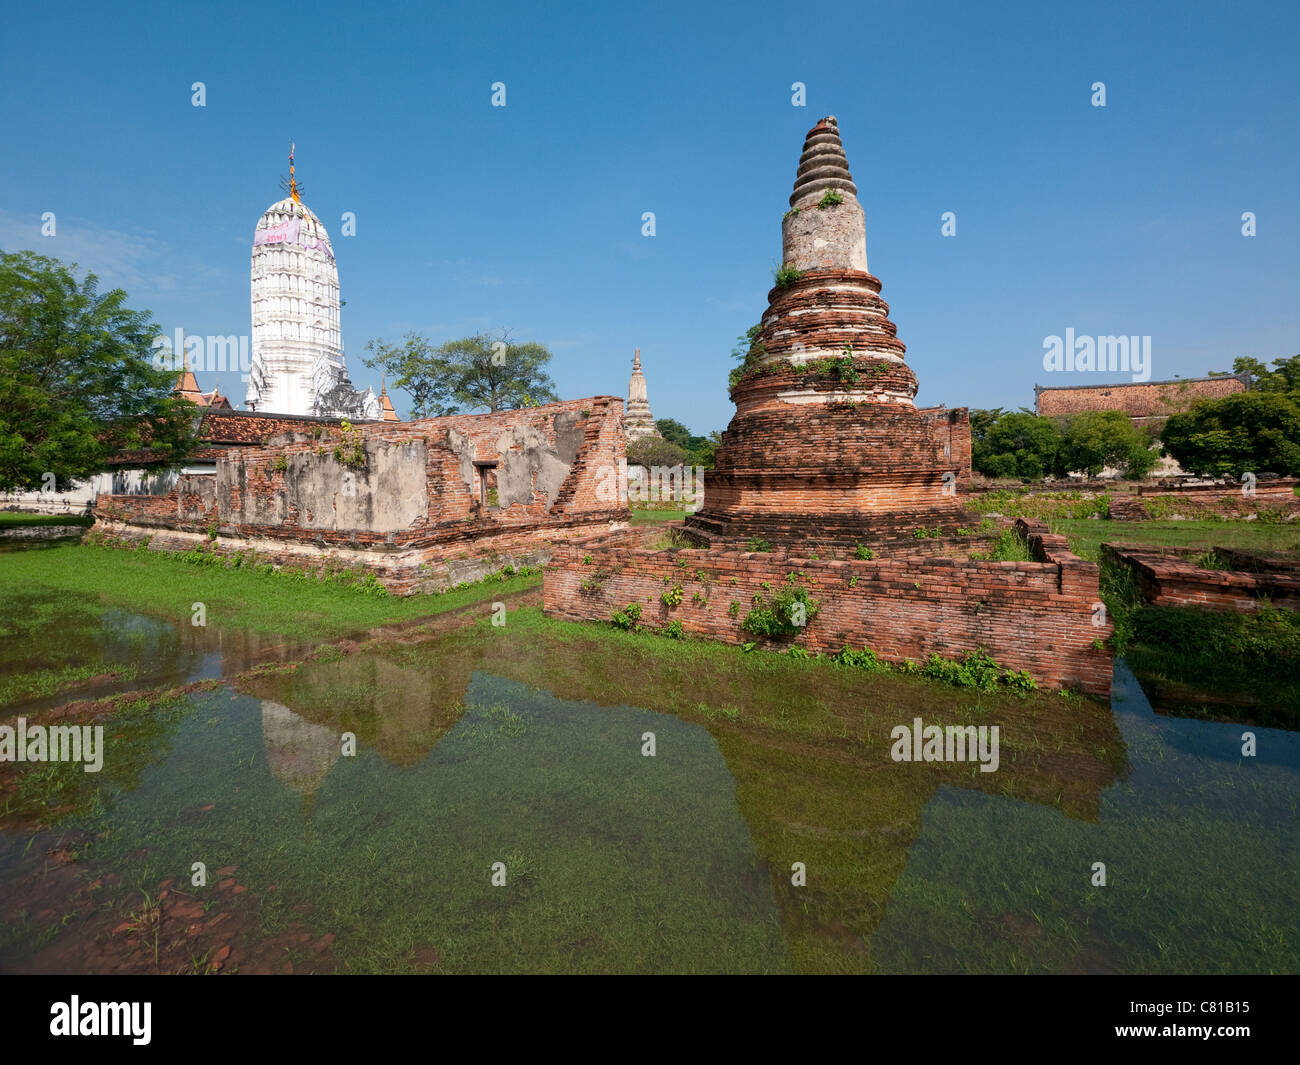 Ancient temple ruins flooded during the monsoon season in Ayuttaya, Thailand Stock Photo